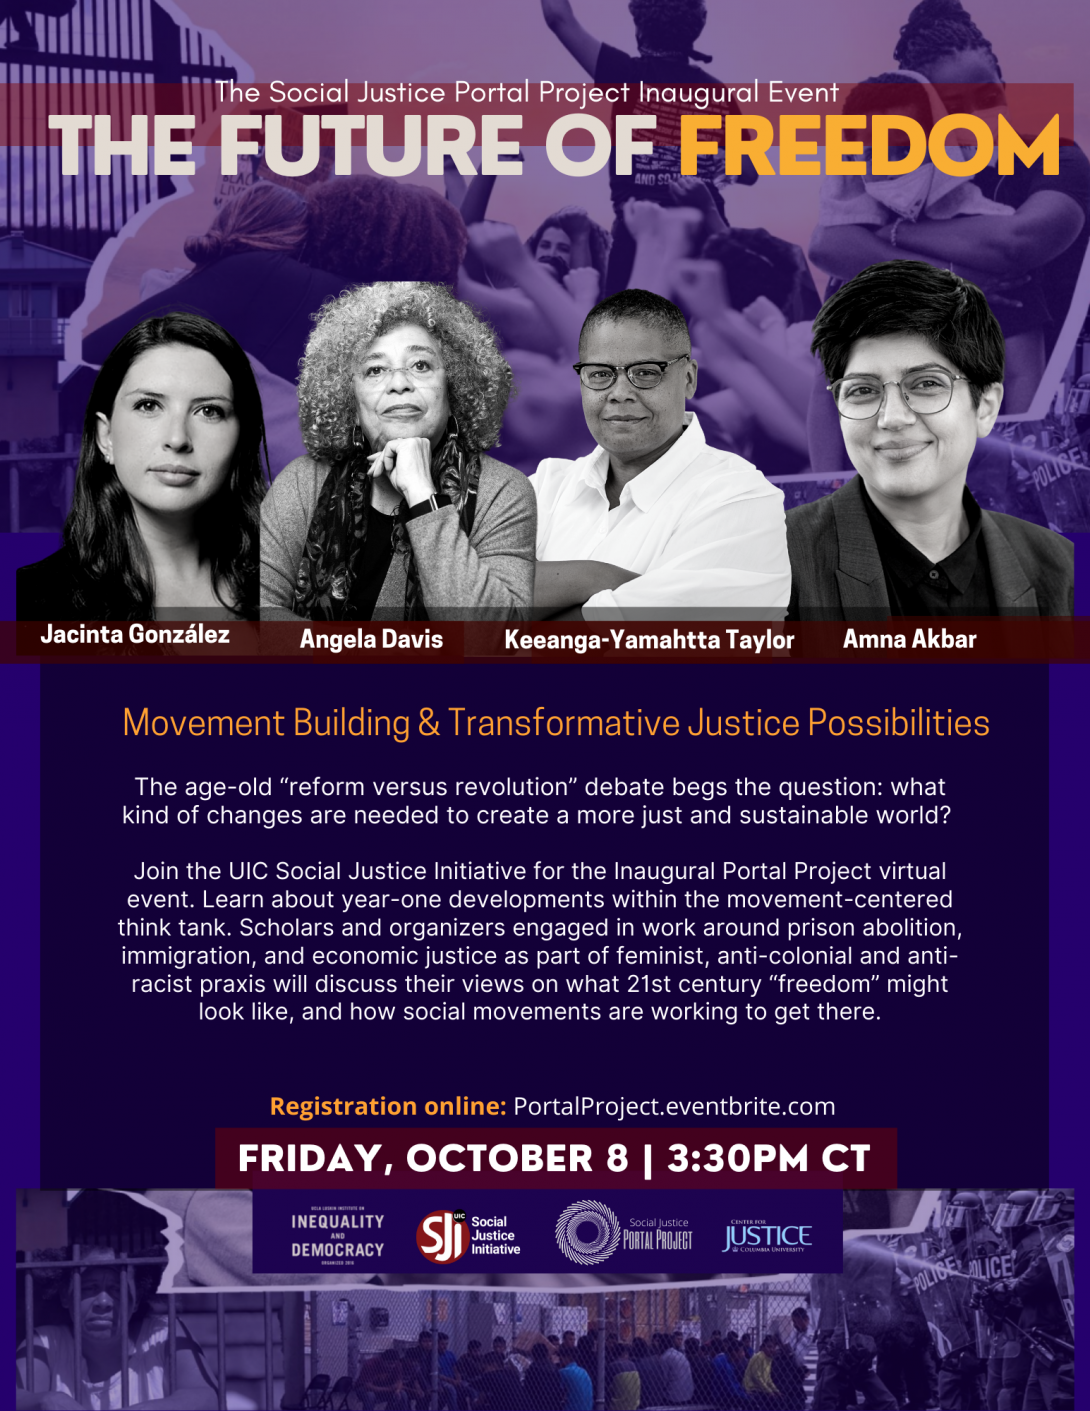 The Social Justice Portal Project Inaugural Event; The Future of Freedom